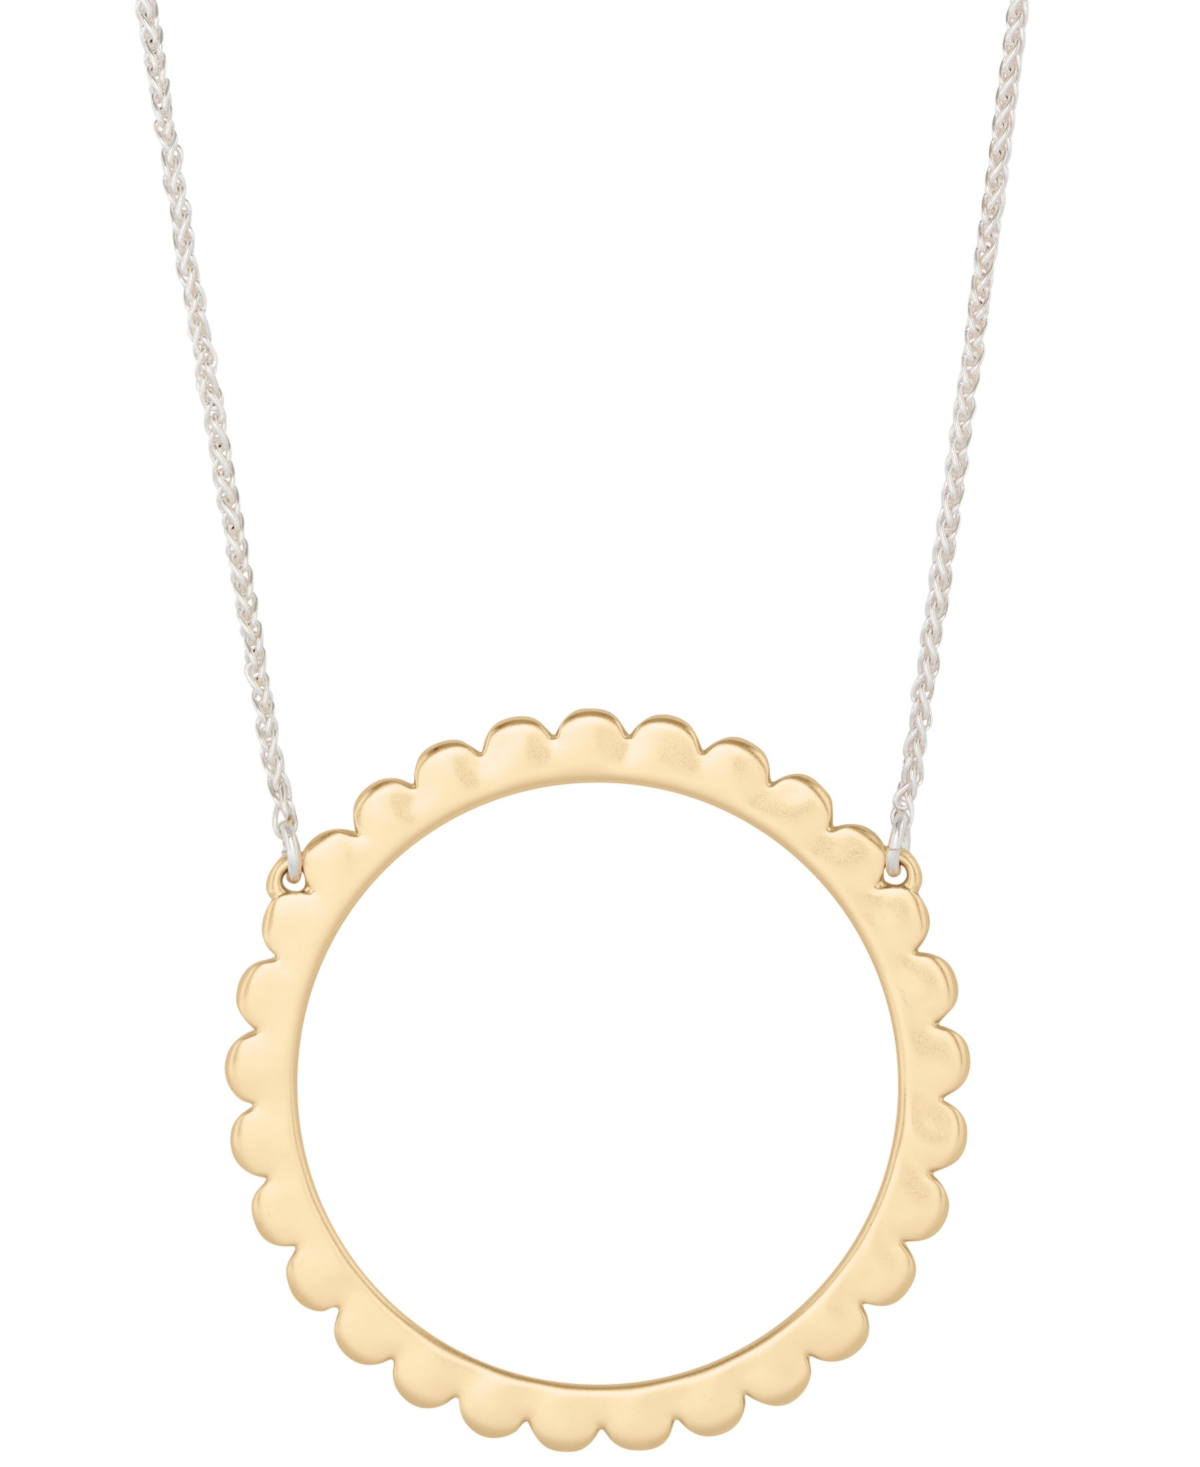 Lucky Brand Two-tone Scalloped Hoop Long Pendant Necklace, 30" + 2" Extender In Silver